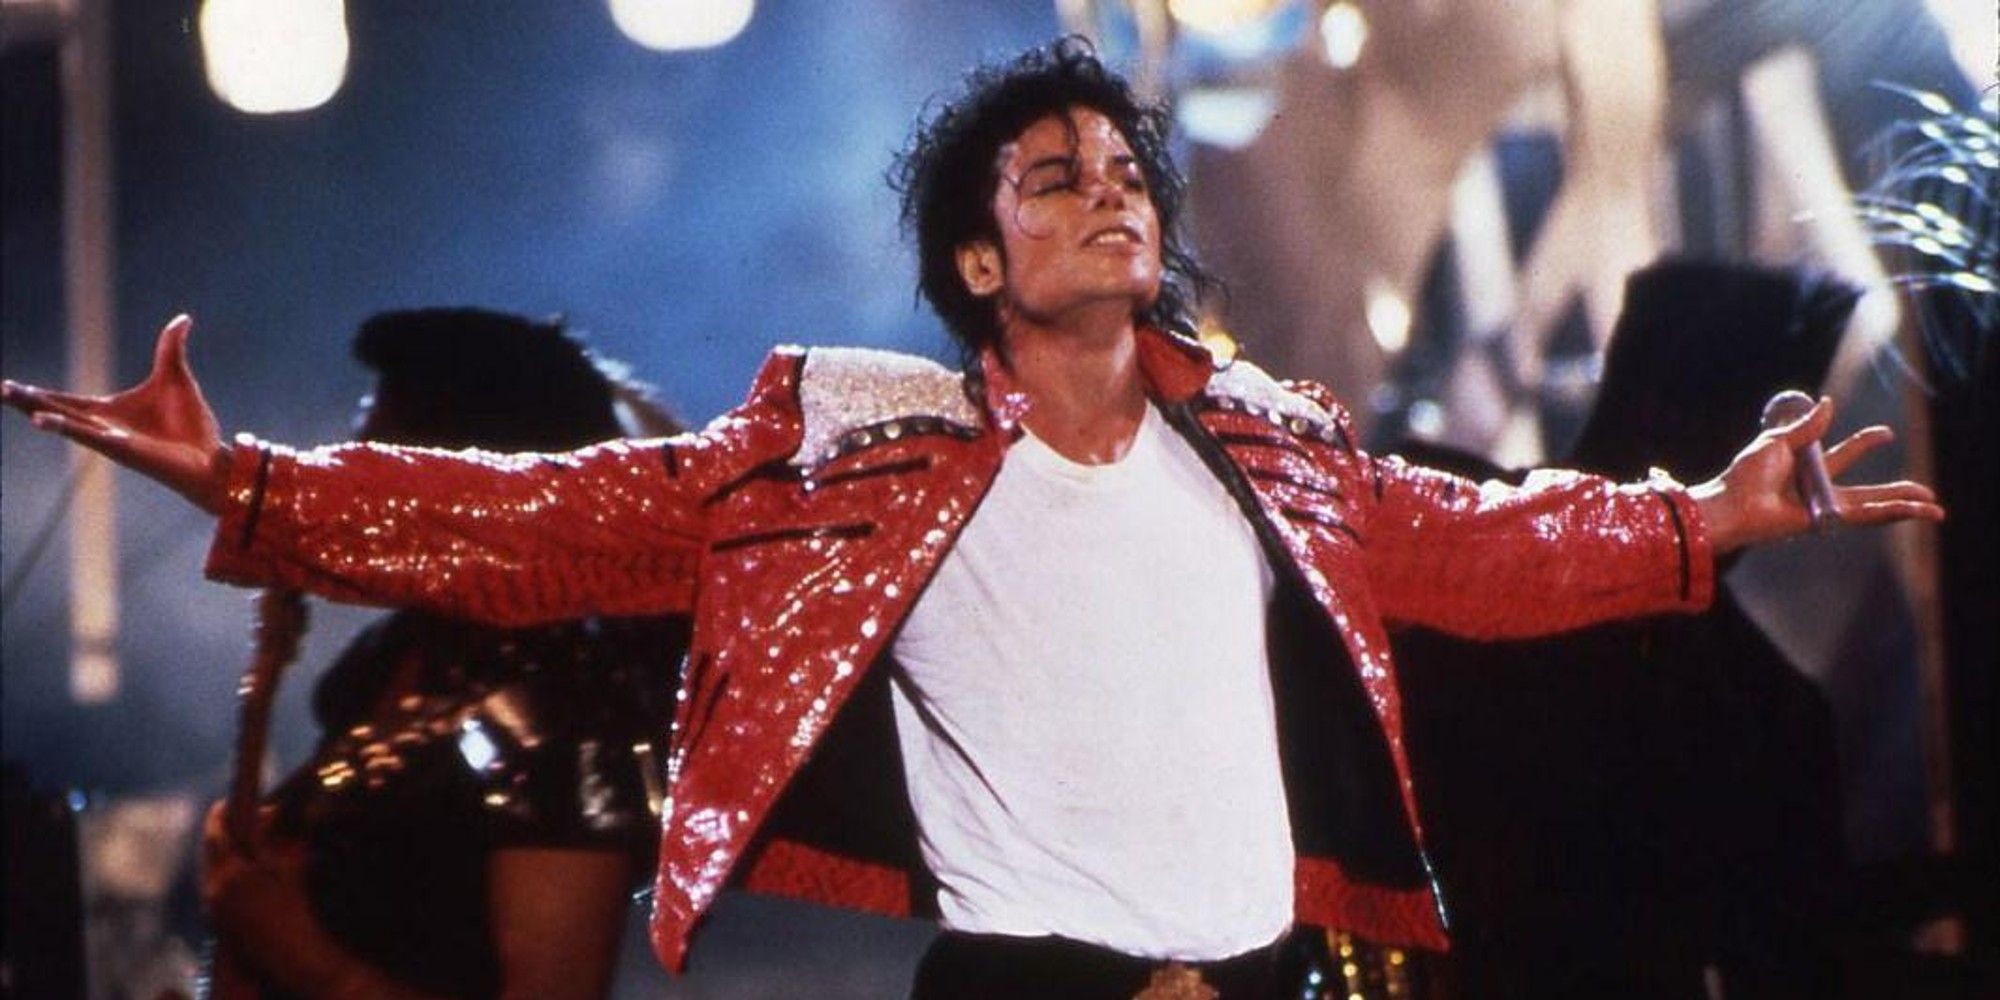 Michael Jackson with his arms open wide performing Beat It